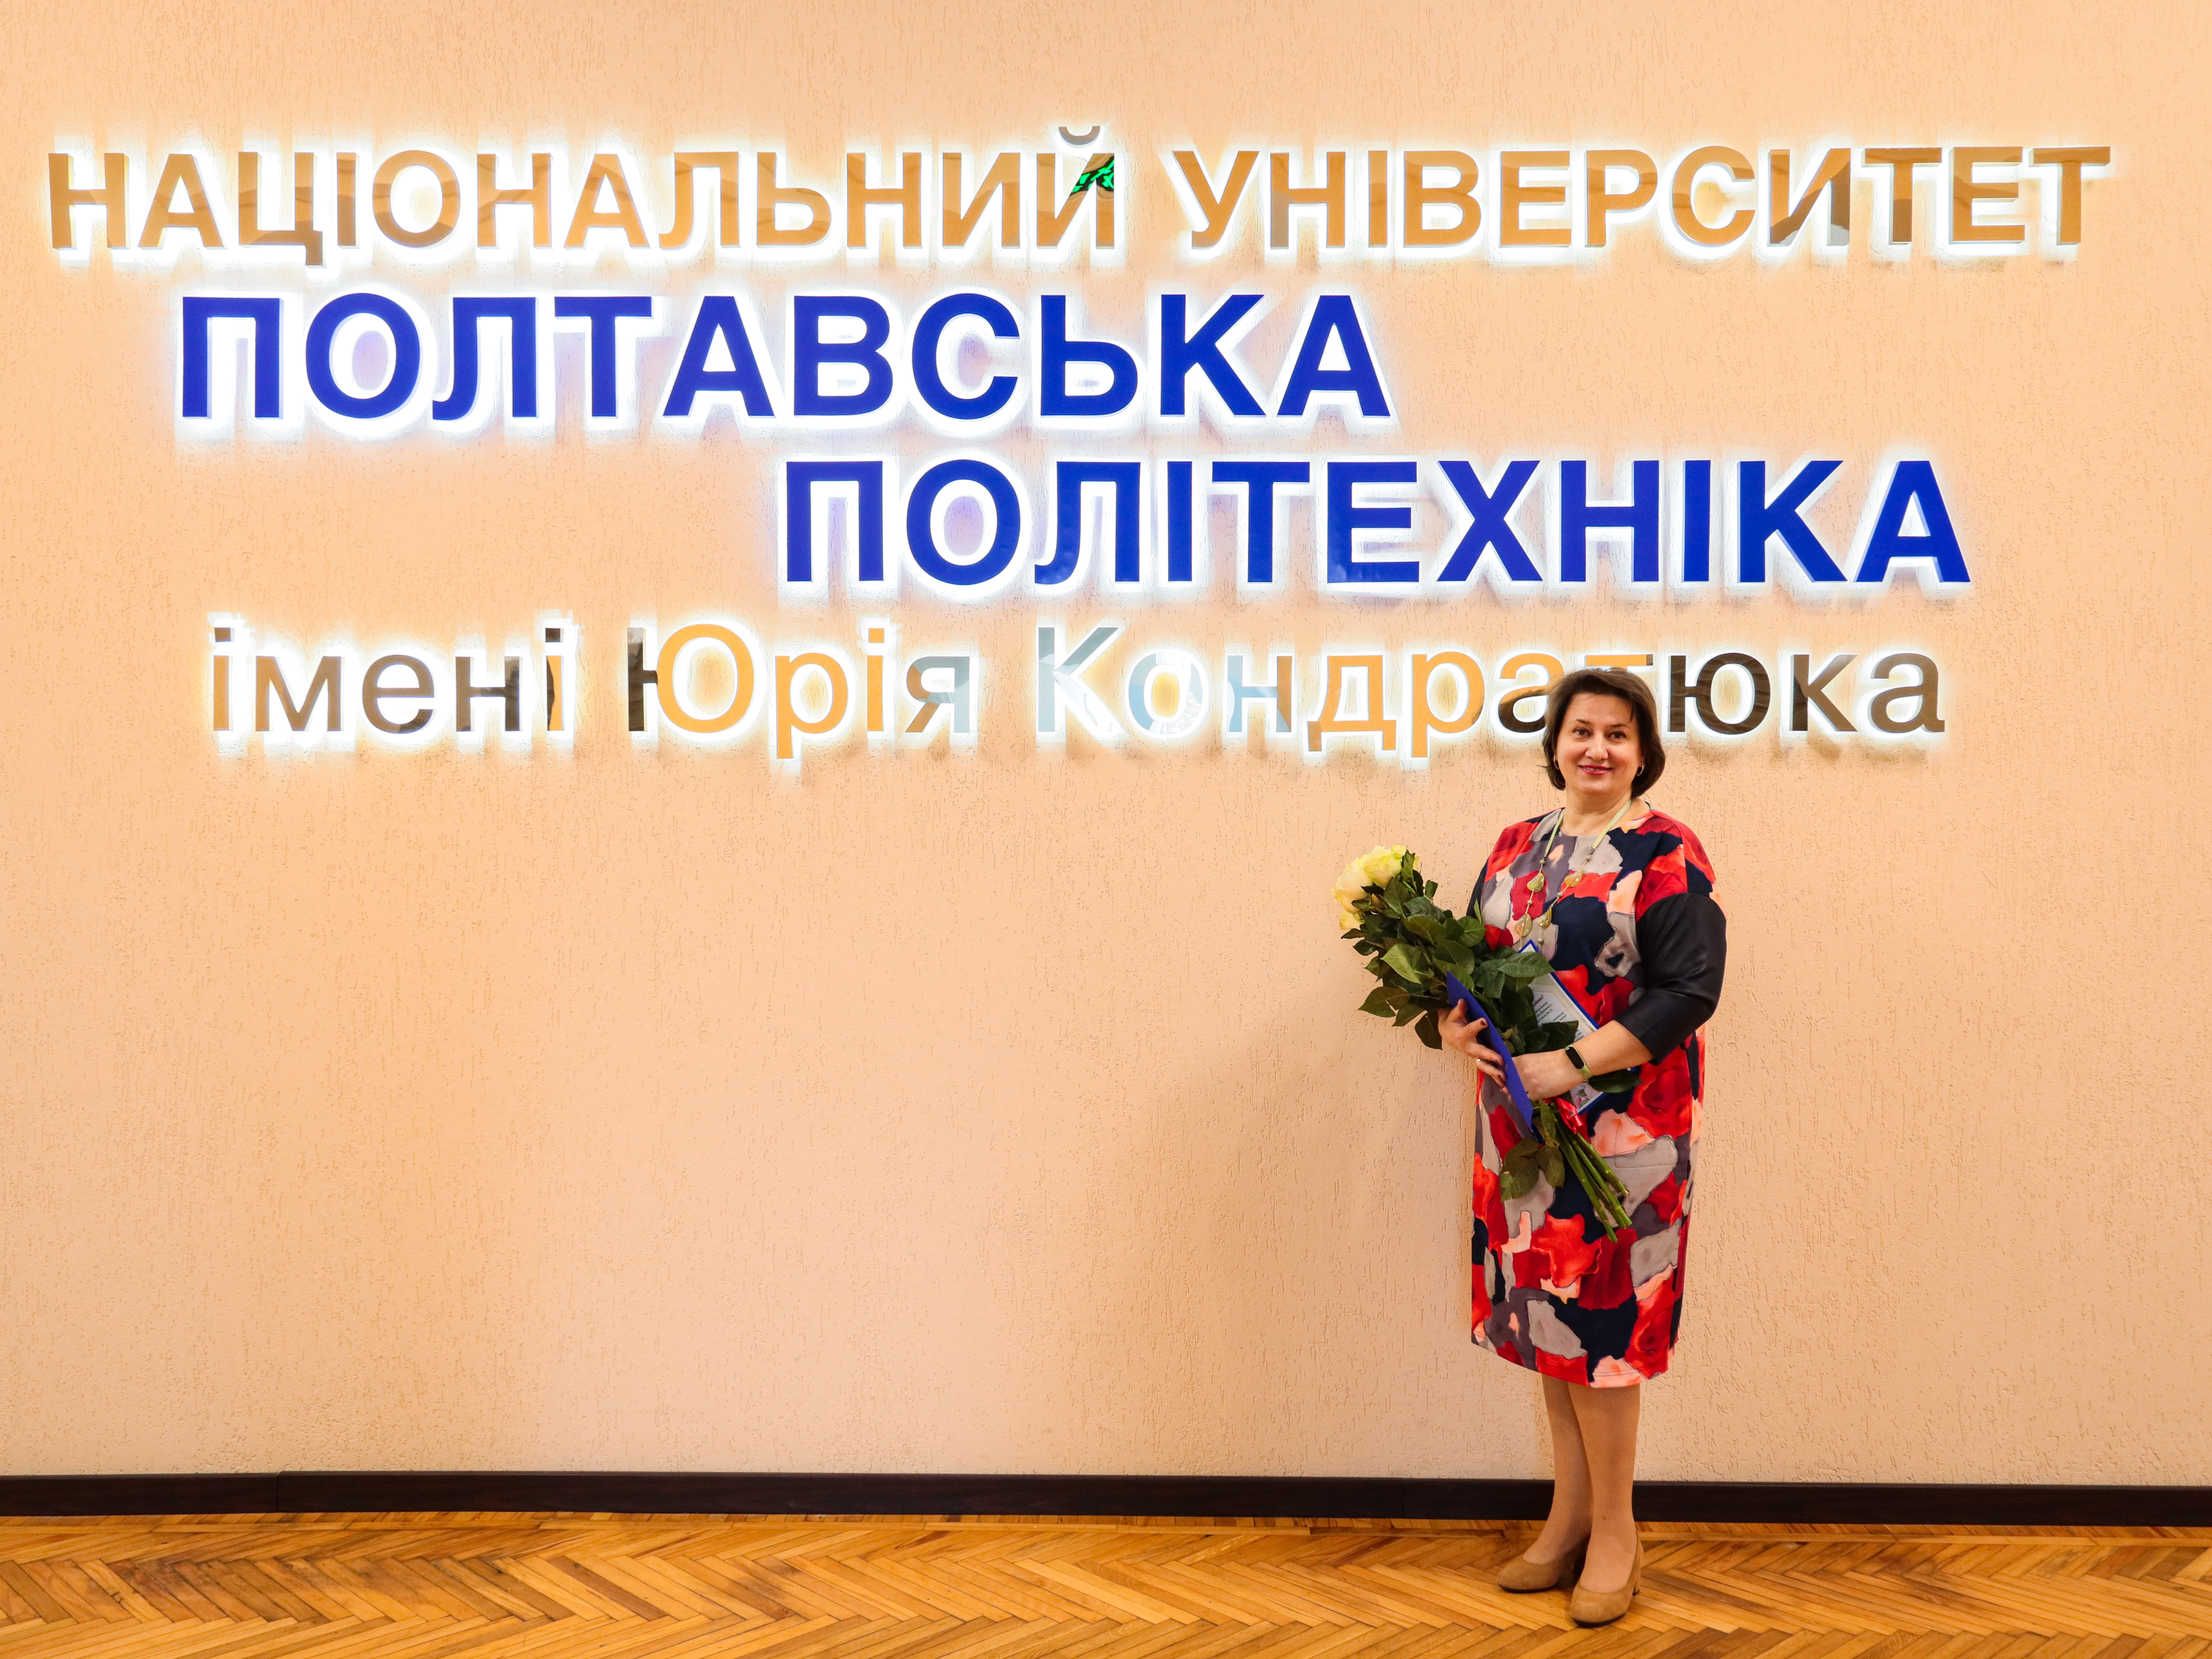 With mathematics through life: Head of the Department of Higher and Applied Mathematics of Poltava Polytechnic celebrates her anniversary